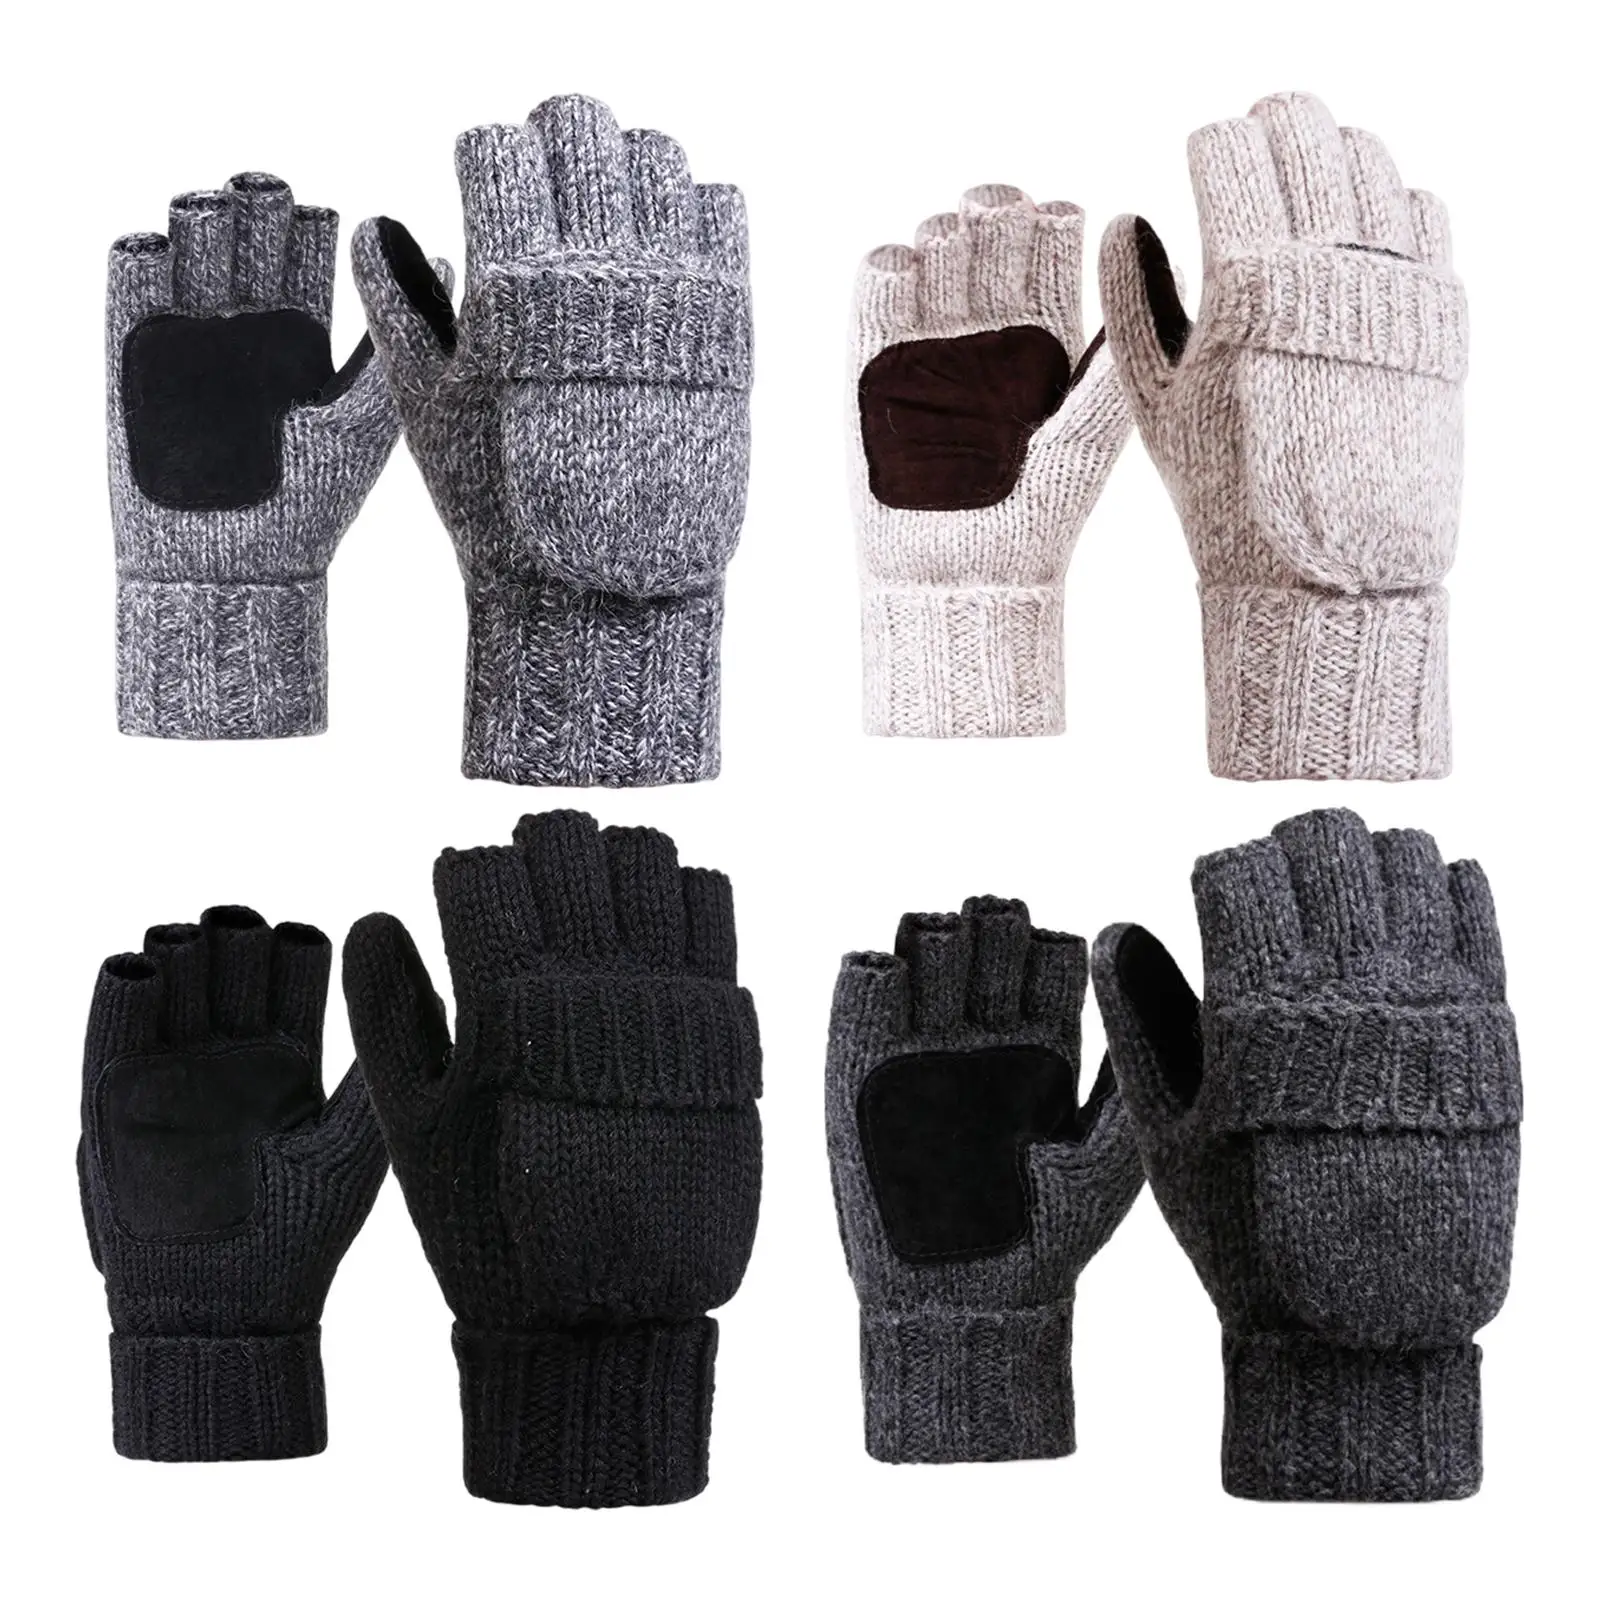 Flip Half Finger  Cashmere Stretchy Knitting Thick Fingerless Gloves for Women Cycling Cold Weather Writing  Sports